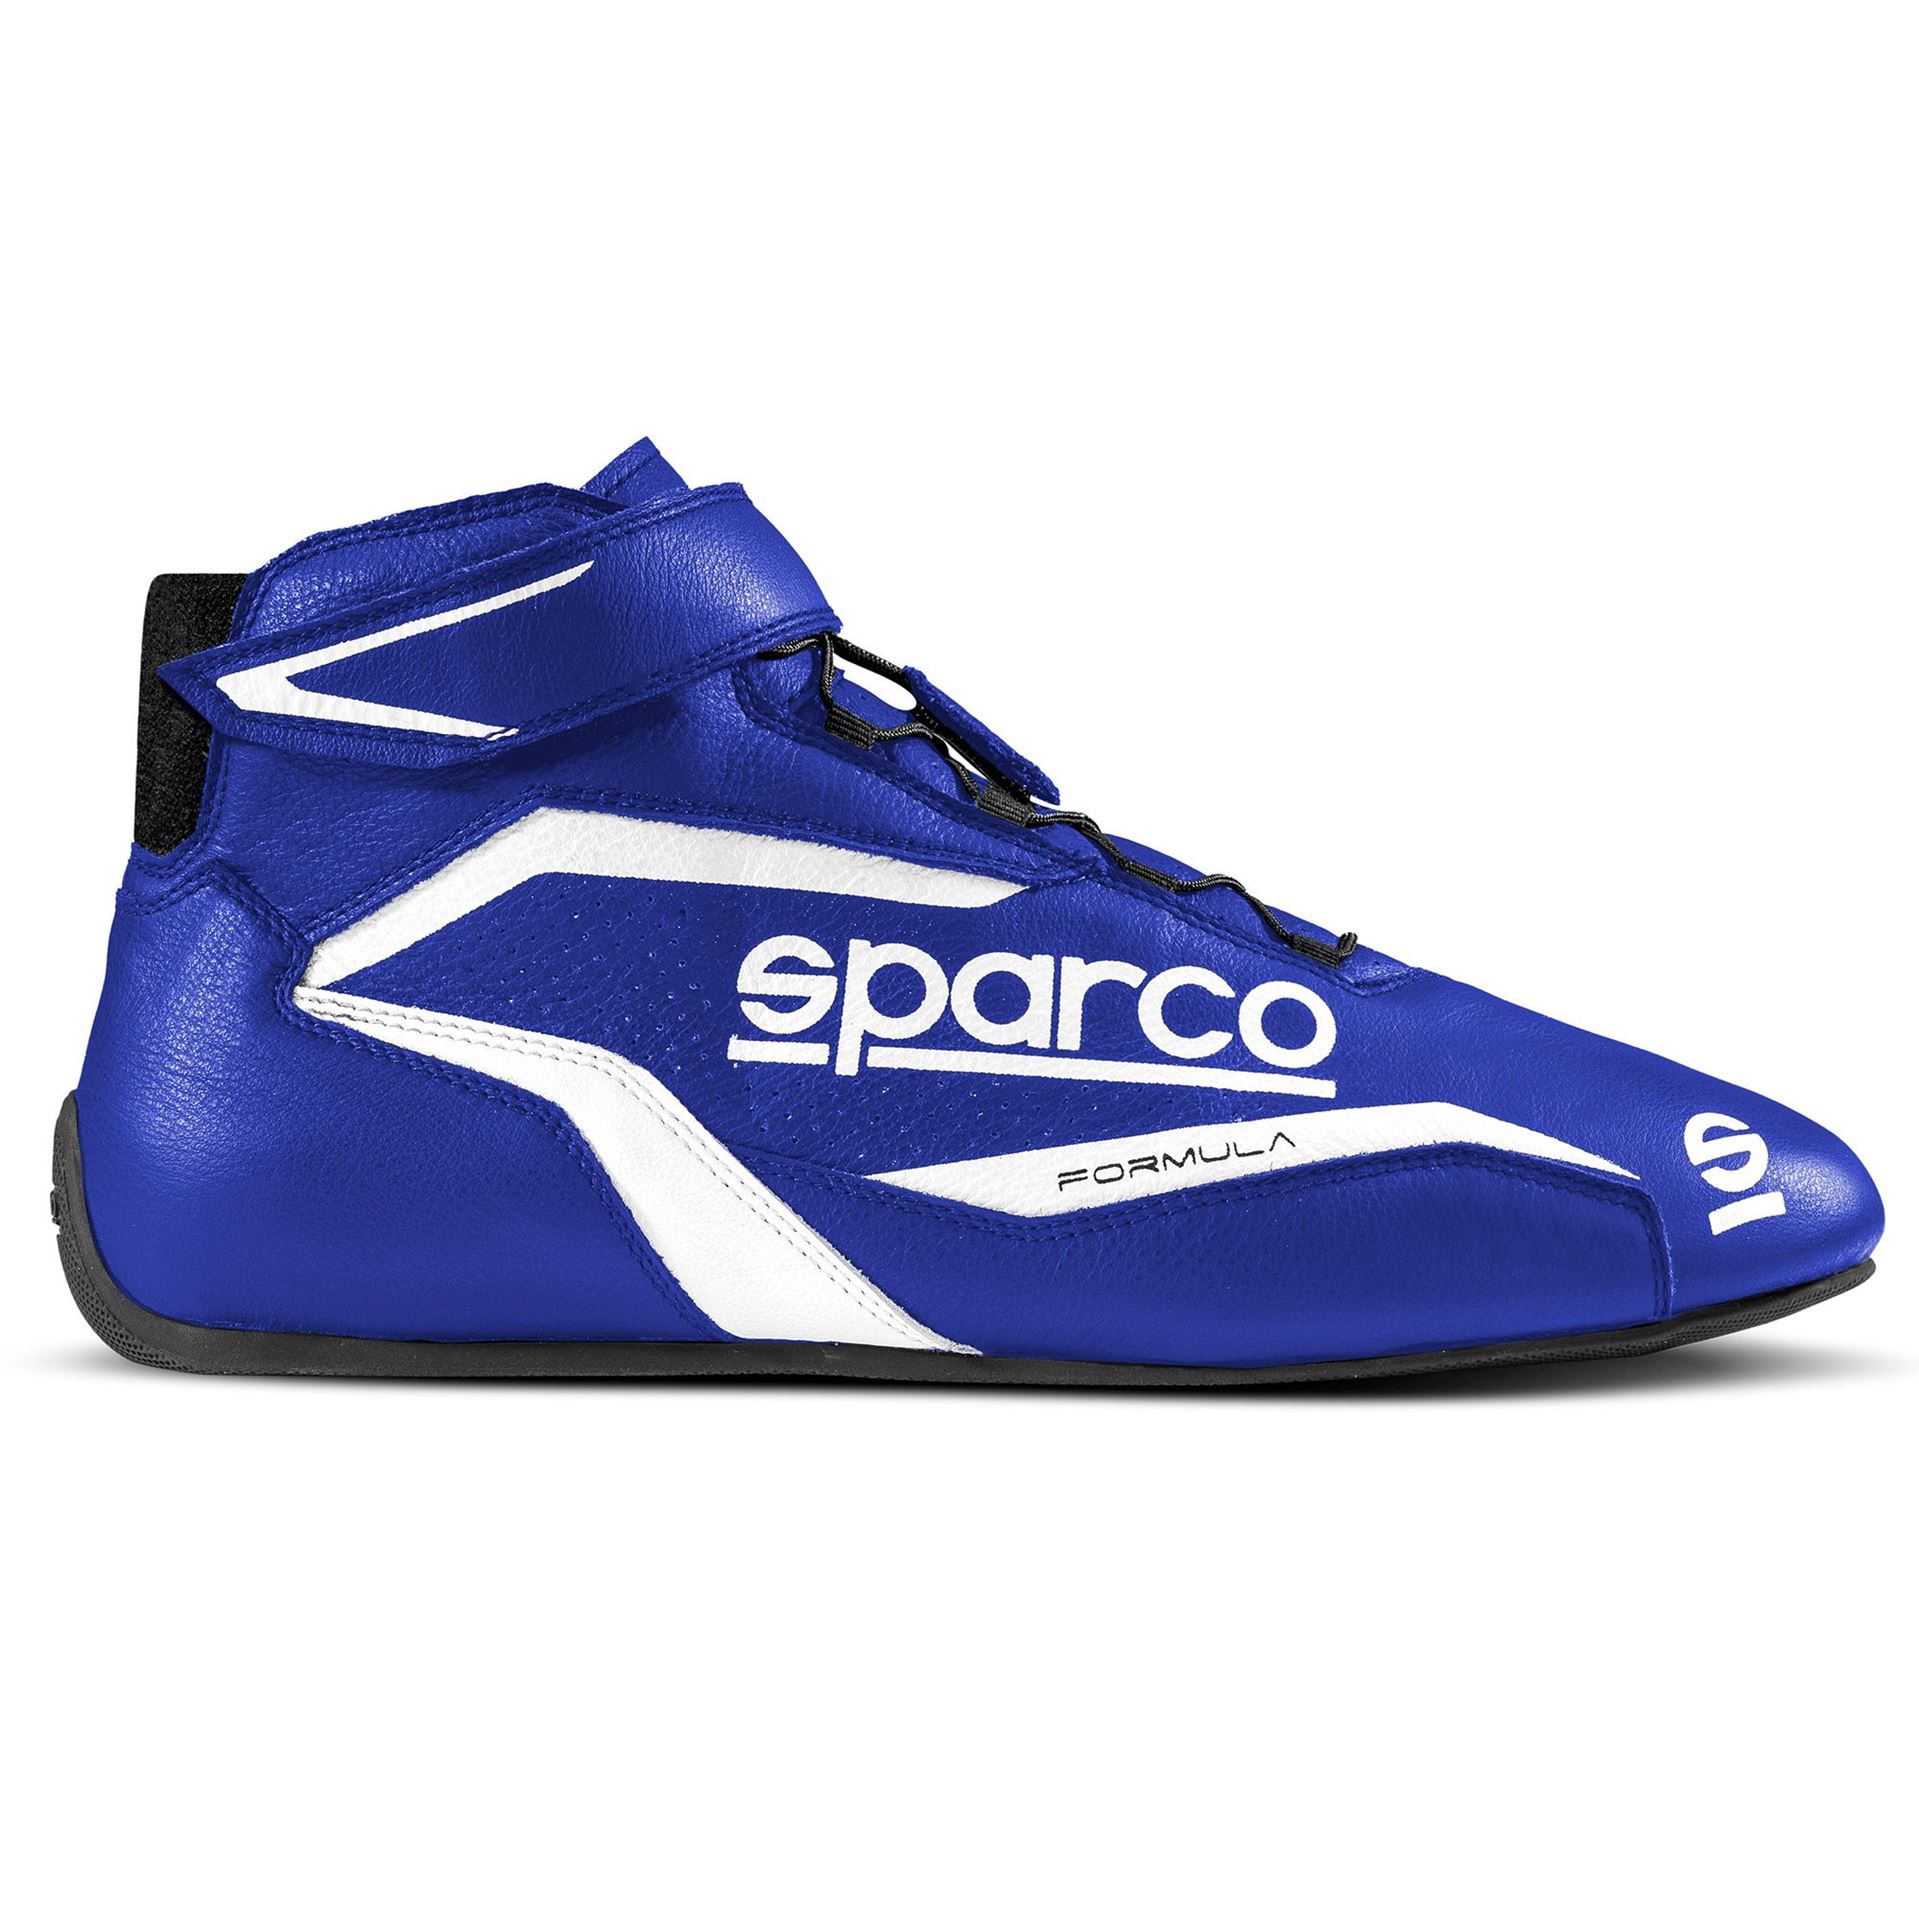 Sparco Formula FIA Boot Autosport Specialists in all things motorsport